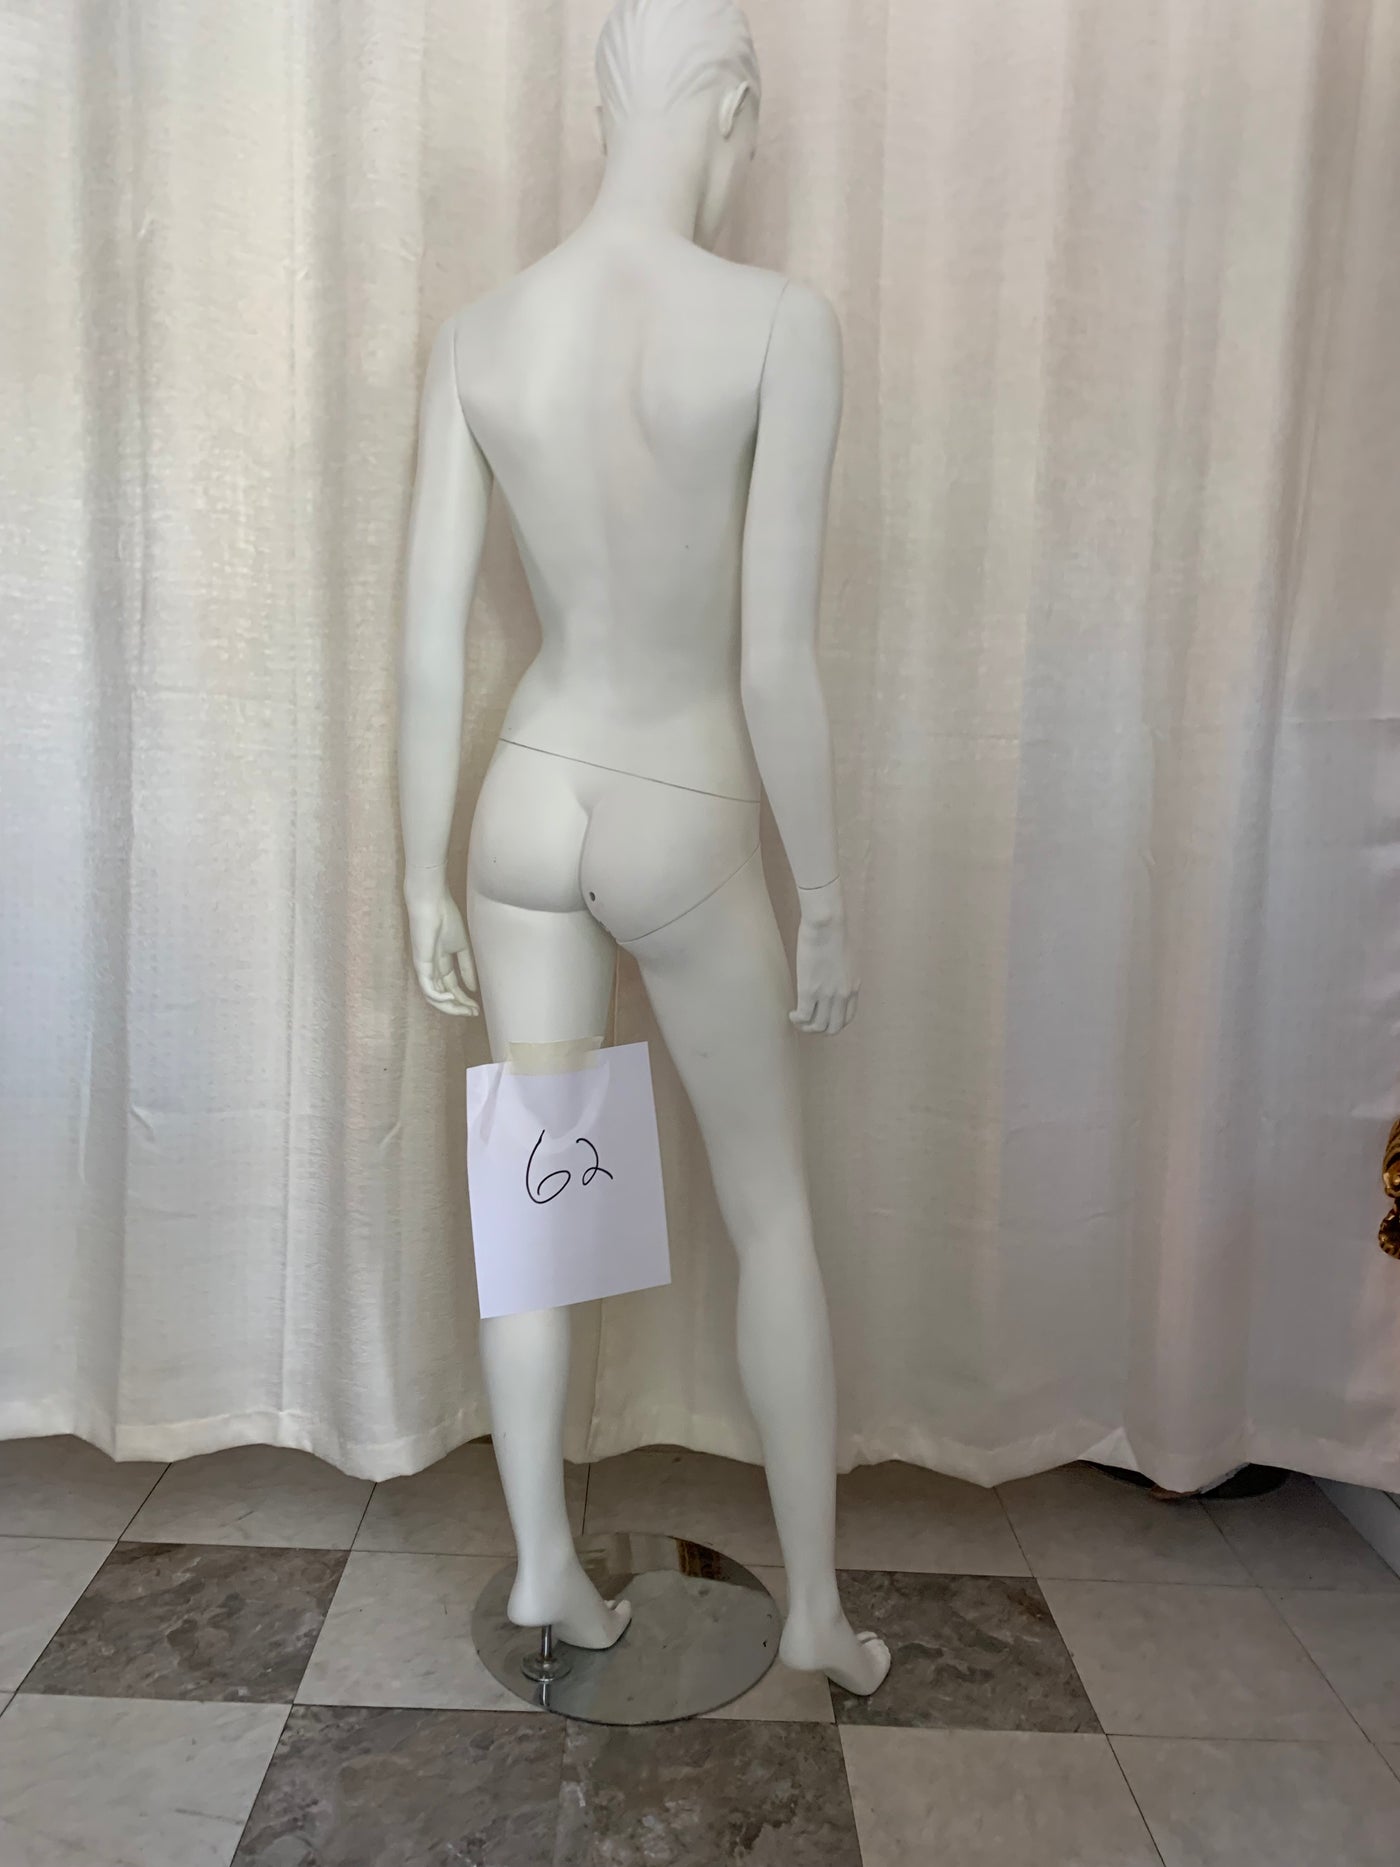 Used Female  Adel Rootstein Mannequin  #62 -Girl Thing